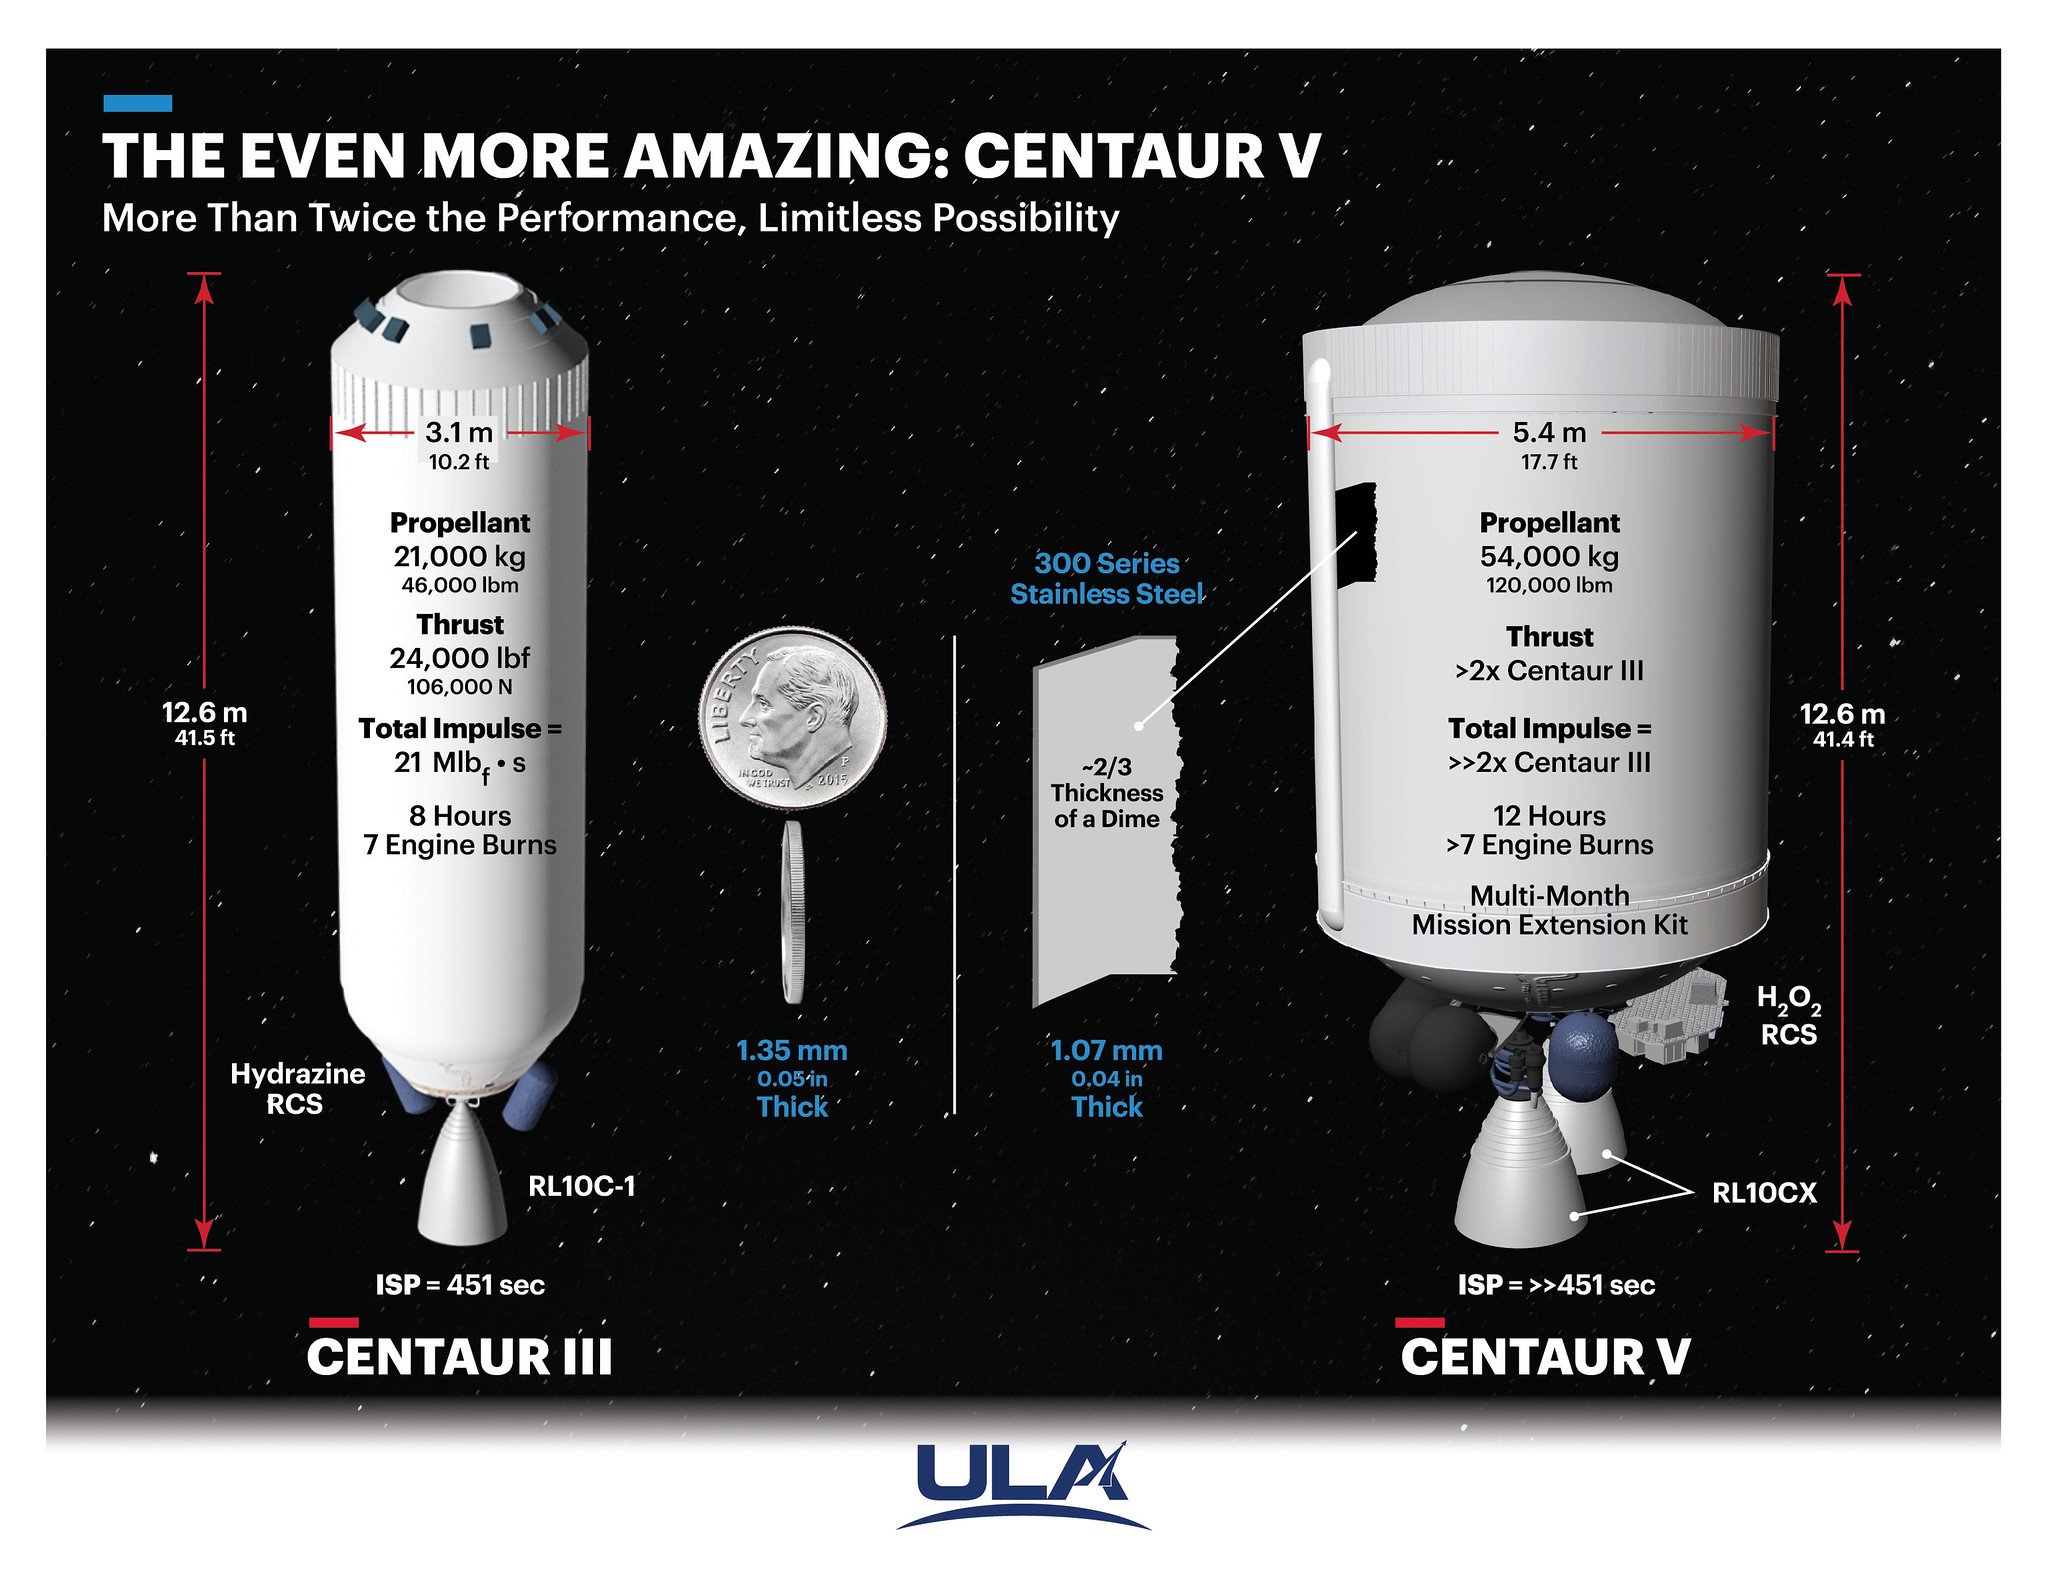 Centaur is evolving from today's Atlas V upper stage to the new Centaur V for Vulcan. Illustration by United Launch Alliance  